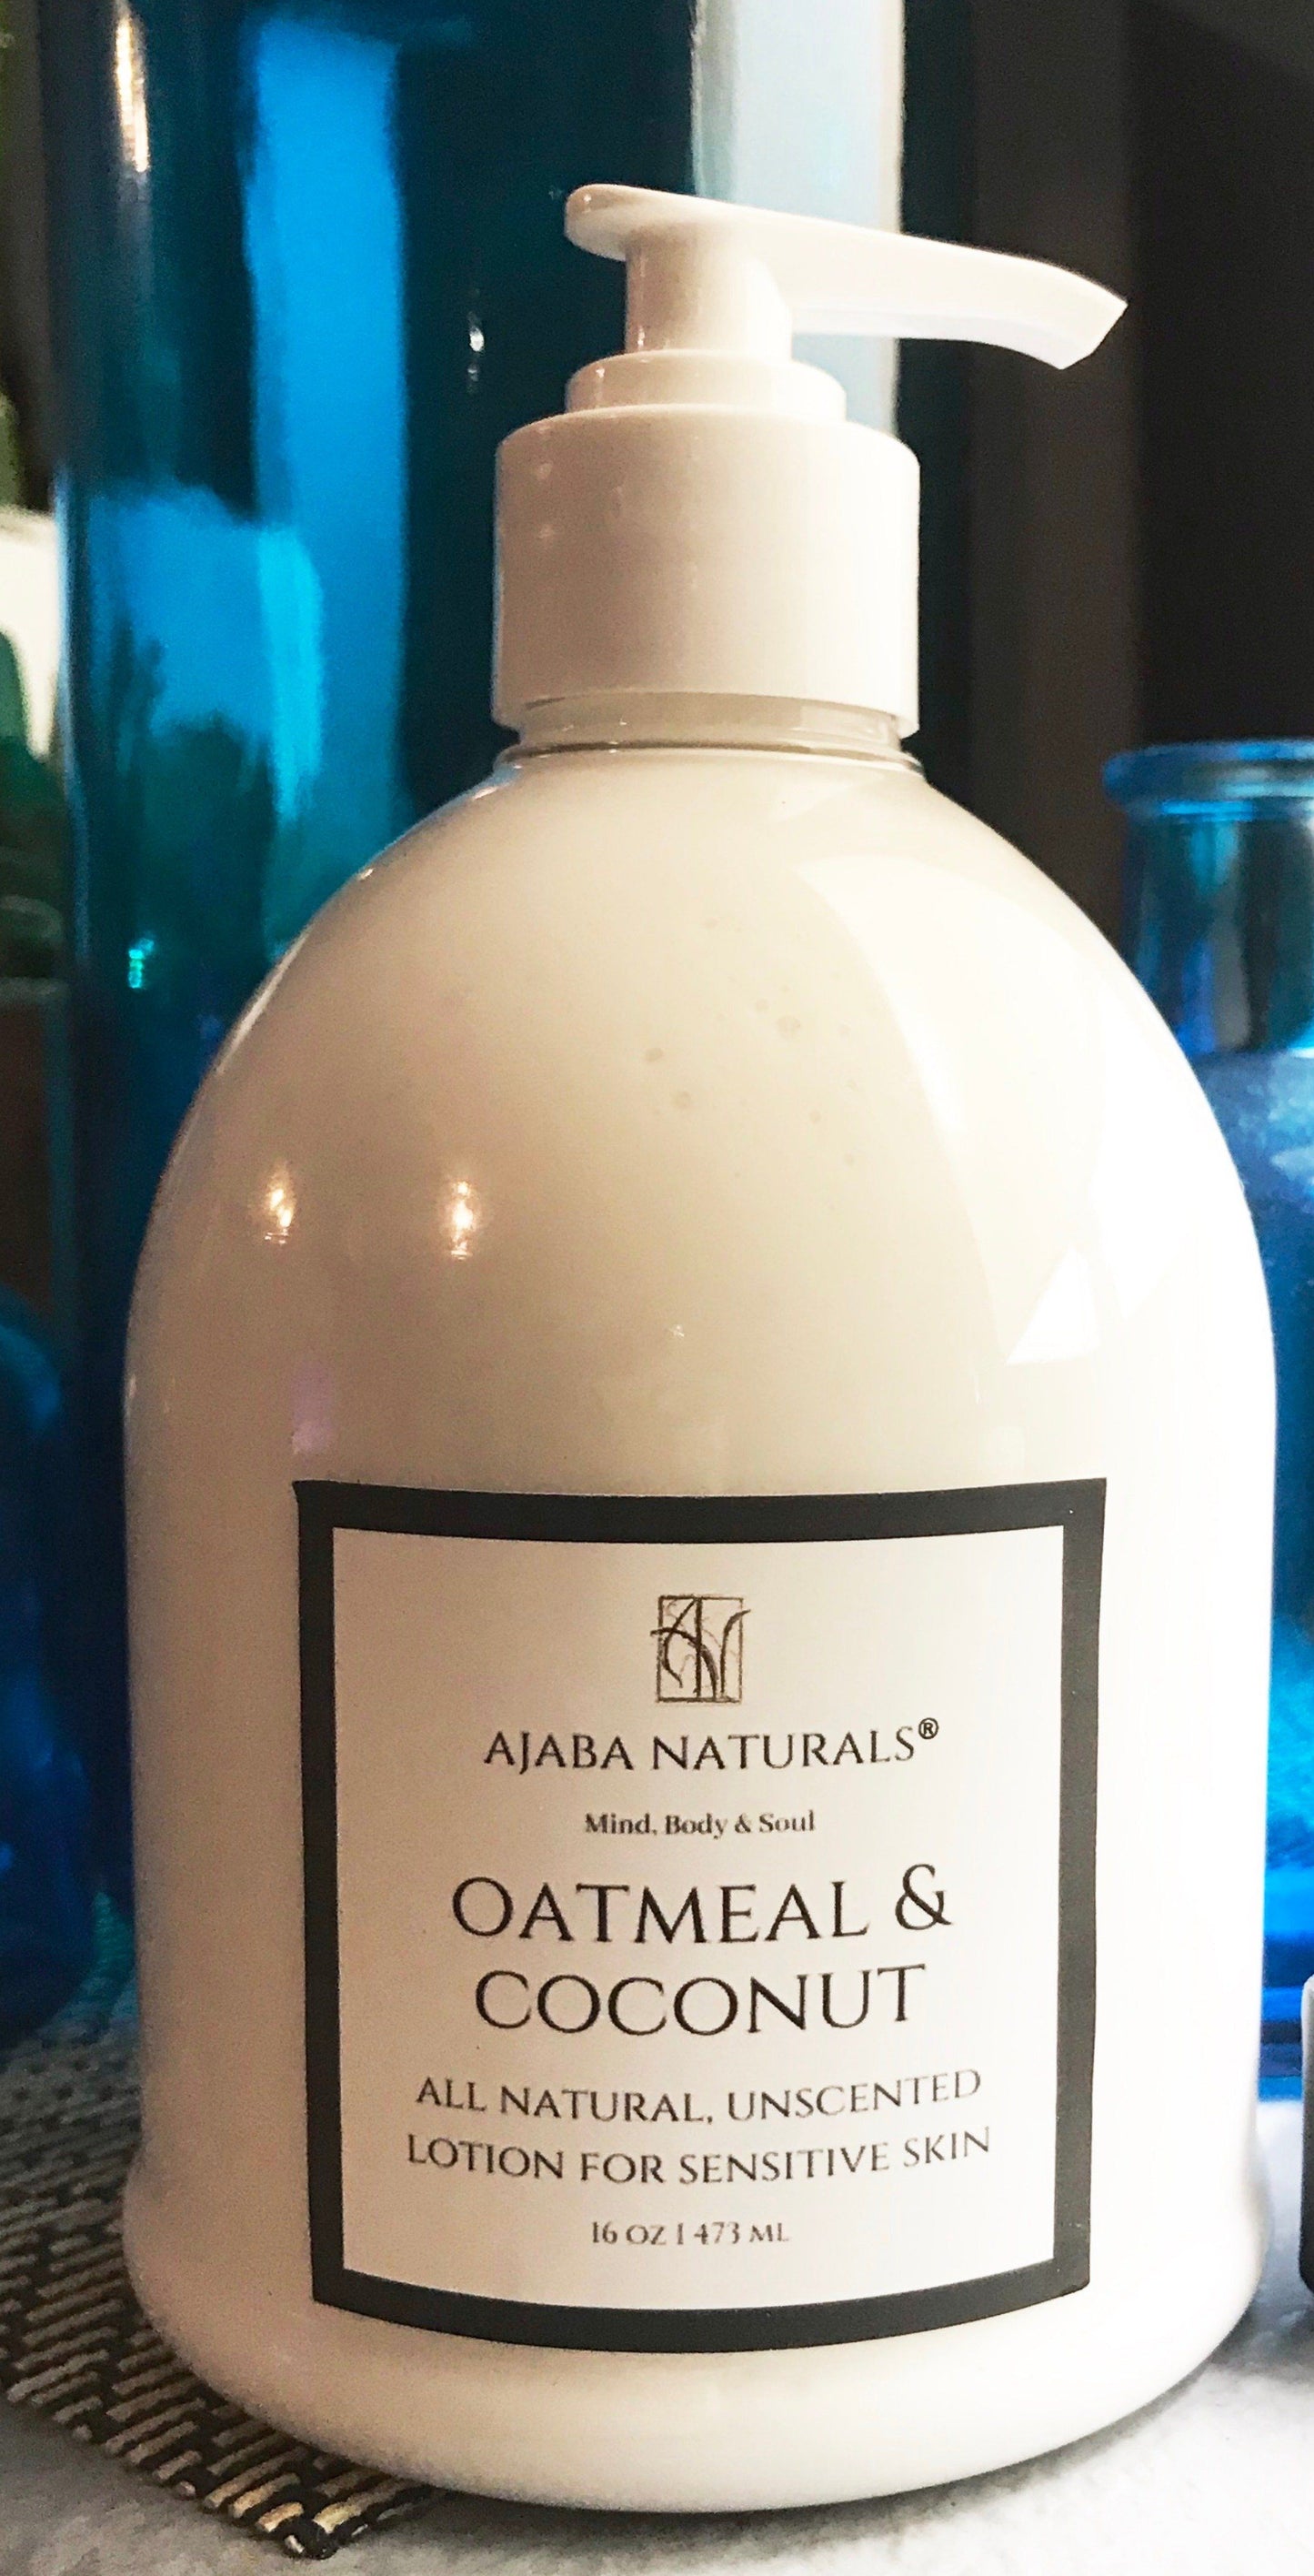 All Natural Oatmeal & Coconut Unscented Lotion for Sensitive Skin Lotion AJABA NATURALS™ 